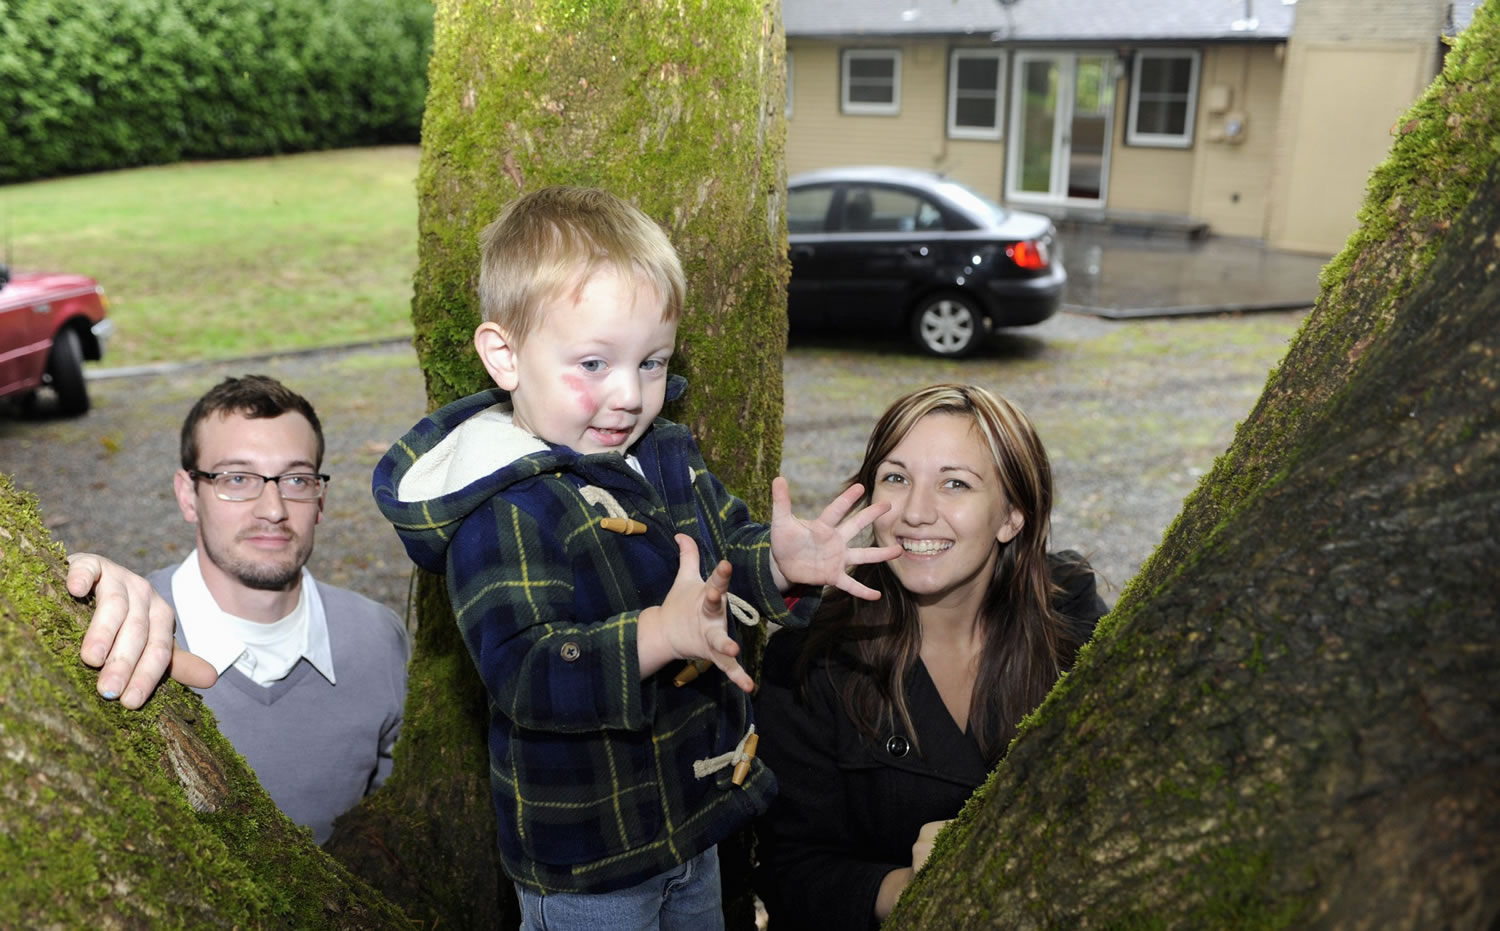 Two-year-old Zephyr Thackeray shows off his new climbing tree with the help of his parents, Ian Thackeray, left, and Tara Thackeray, right, in the back yard of their newly purchased Vancouver starter home.